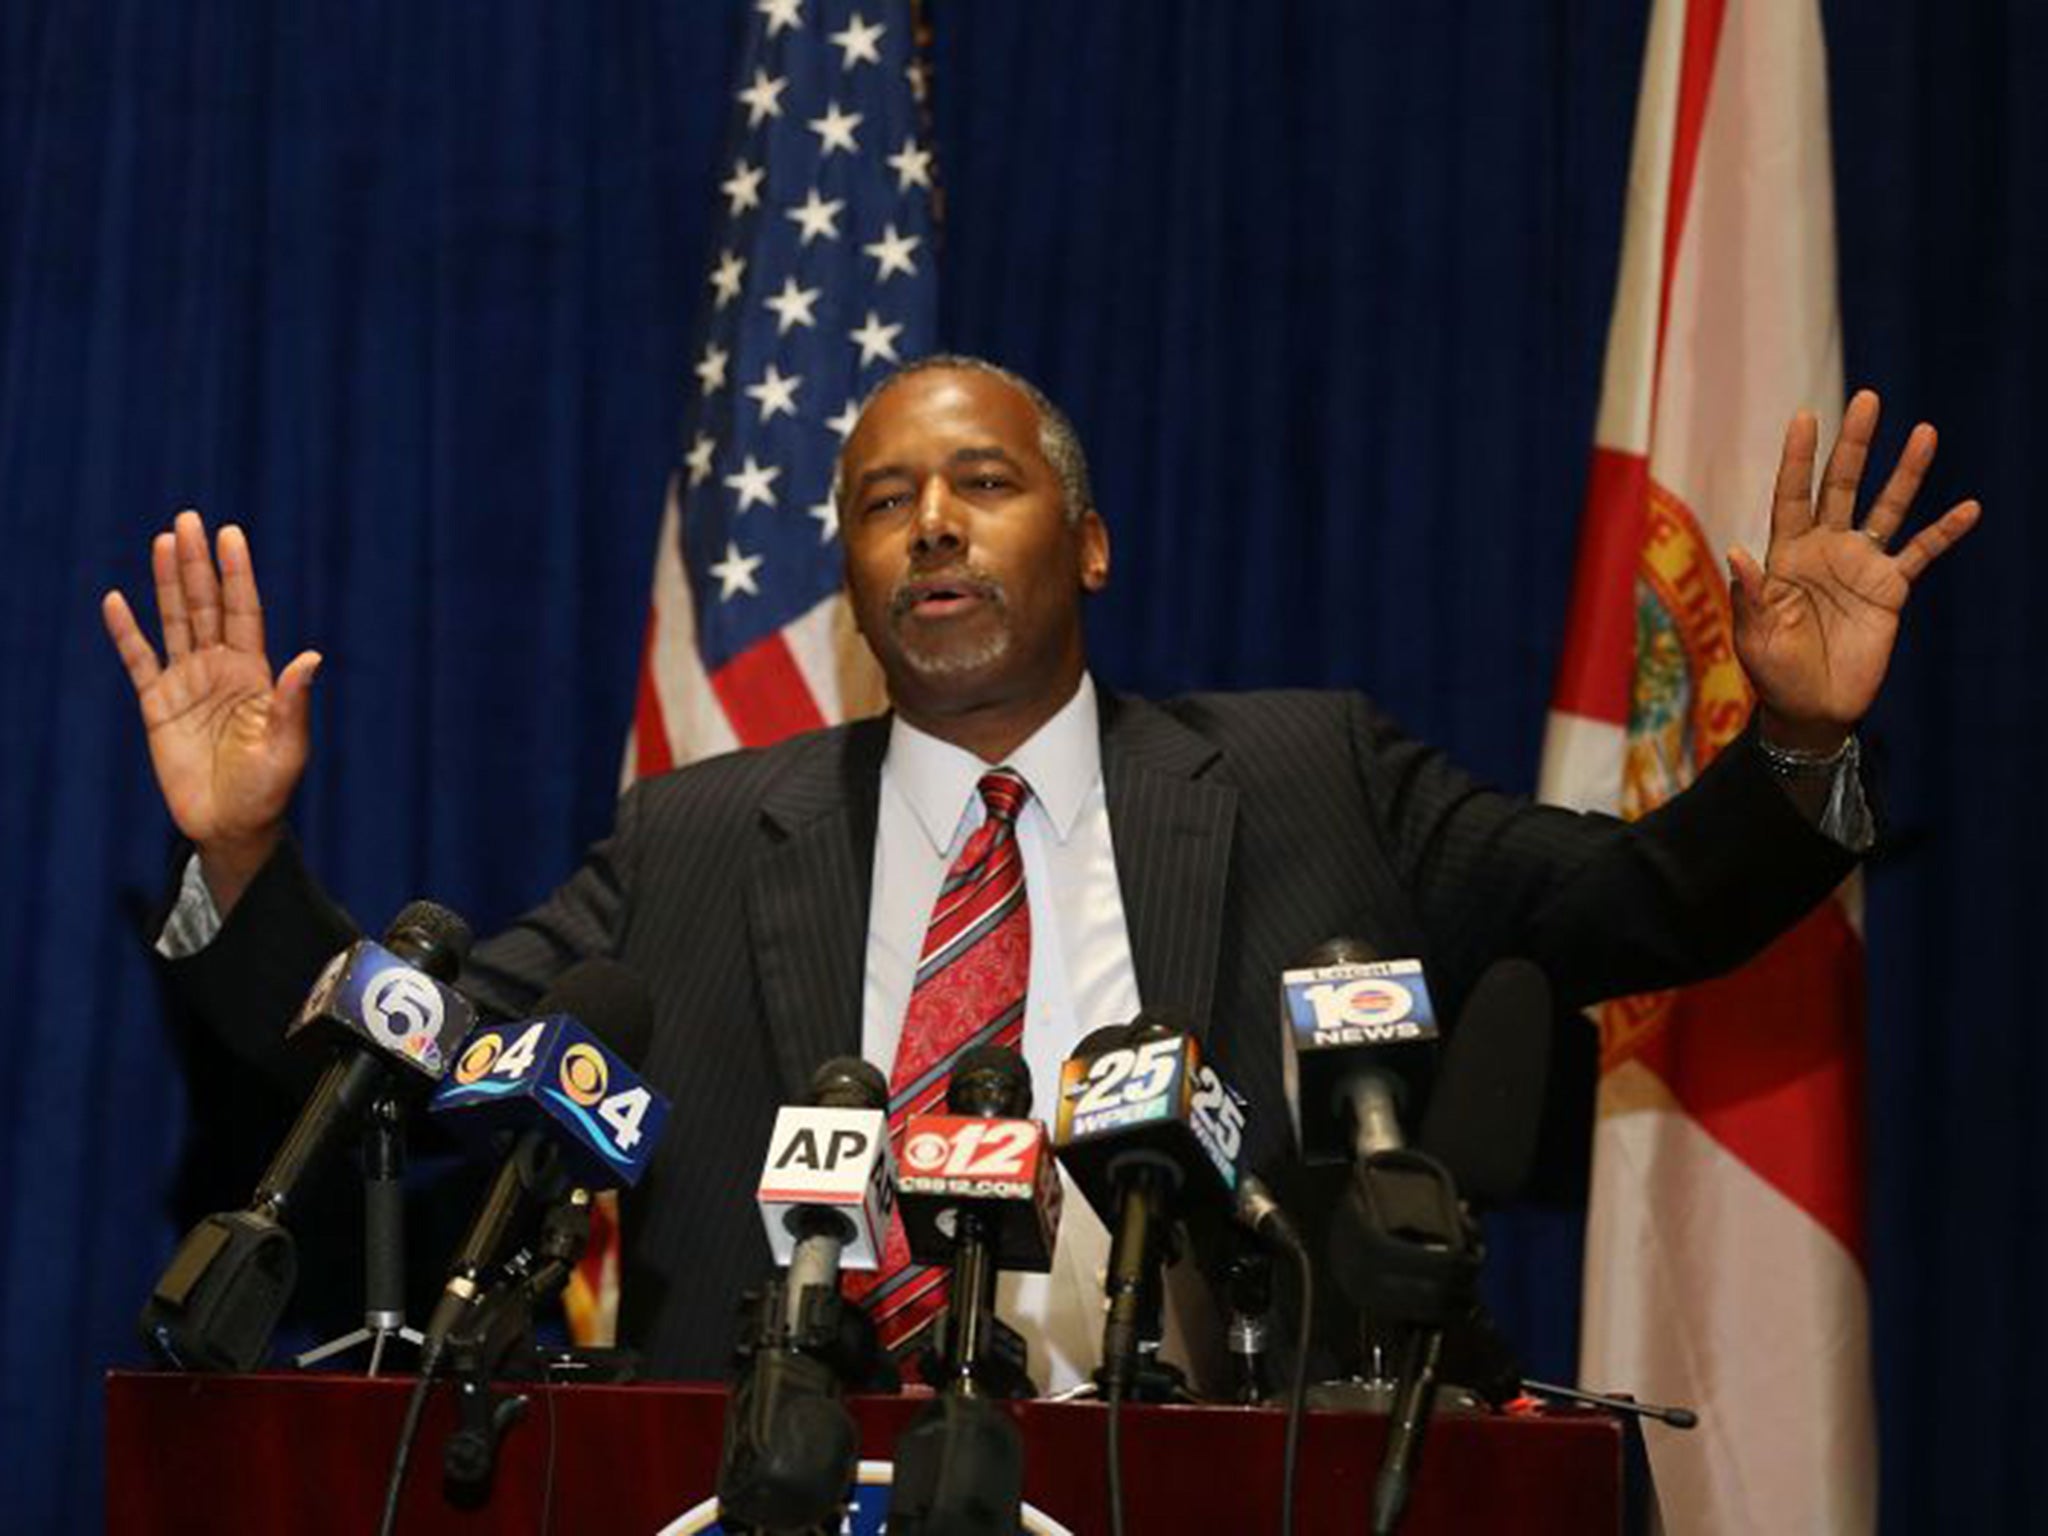 'They are satisfied to be in the refugee camps if the refugee camps are adequately funded,' Carson claimed